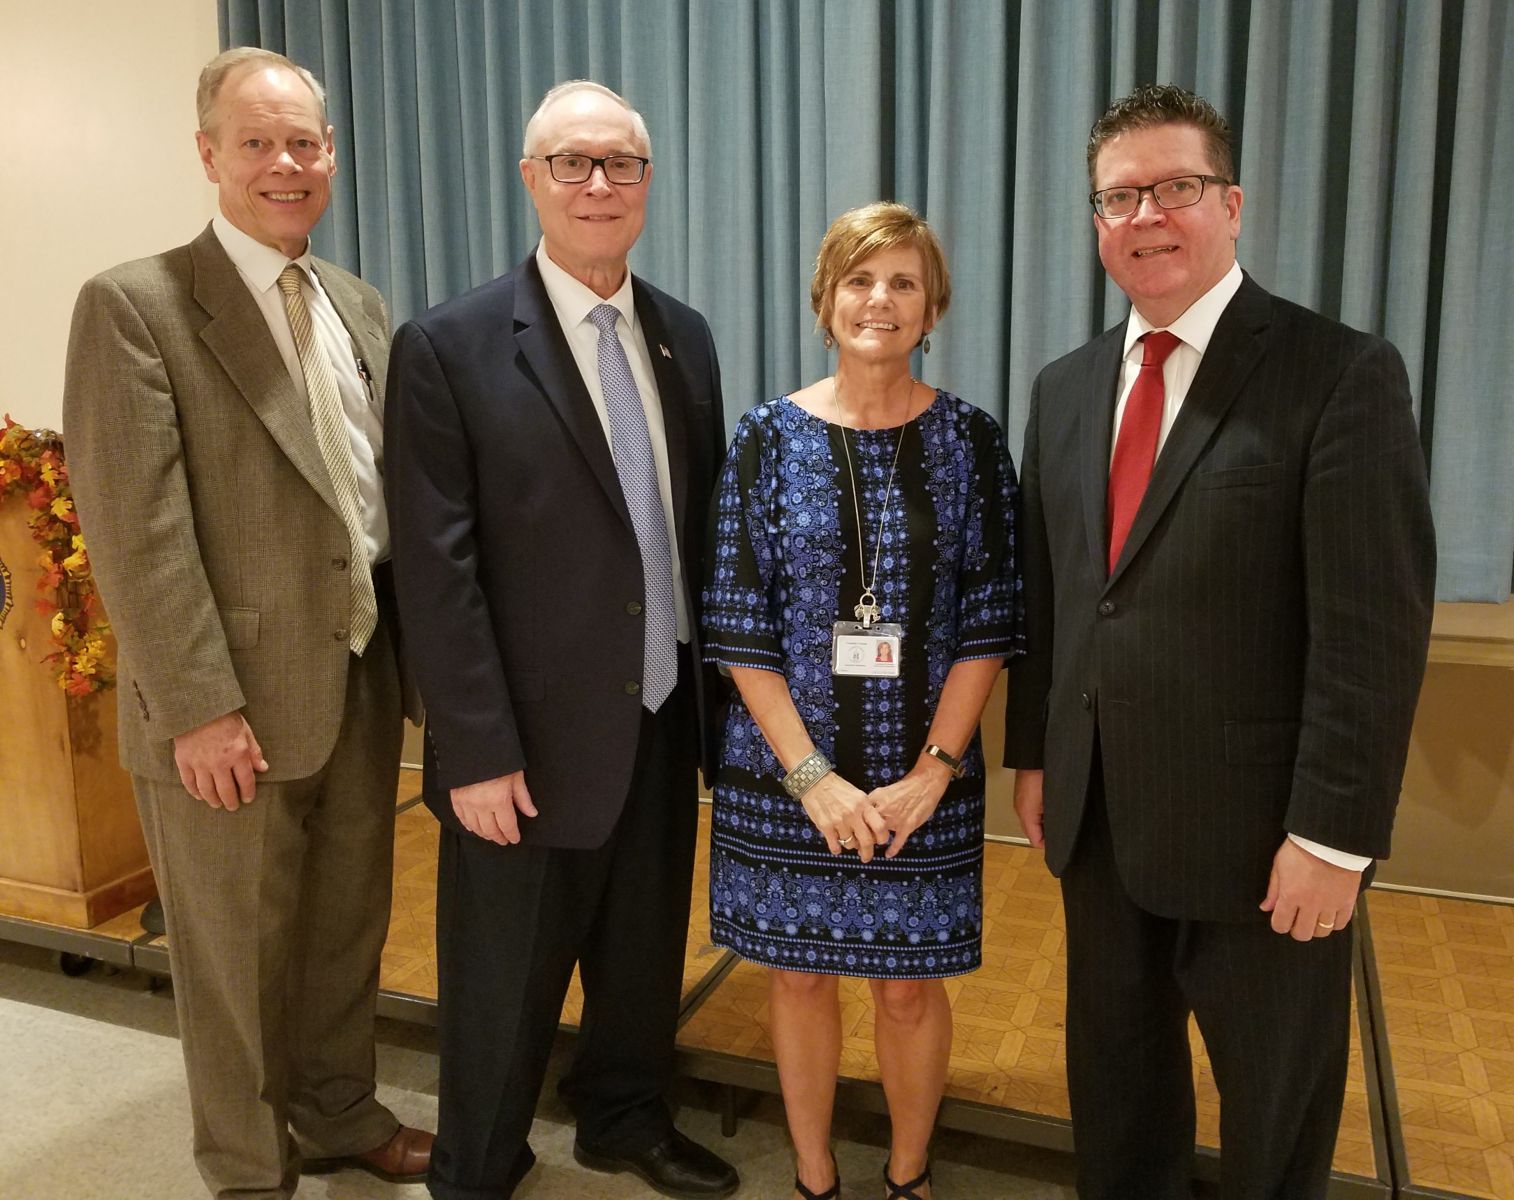 35 Years of Service Pictured above (left to right): Commissioner Bob Ziobrowski, Commissioner Bob Thomas, Lucinda (Sue) Grove, Commissioner Chairman Dave Keller